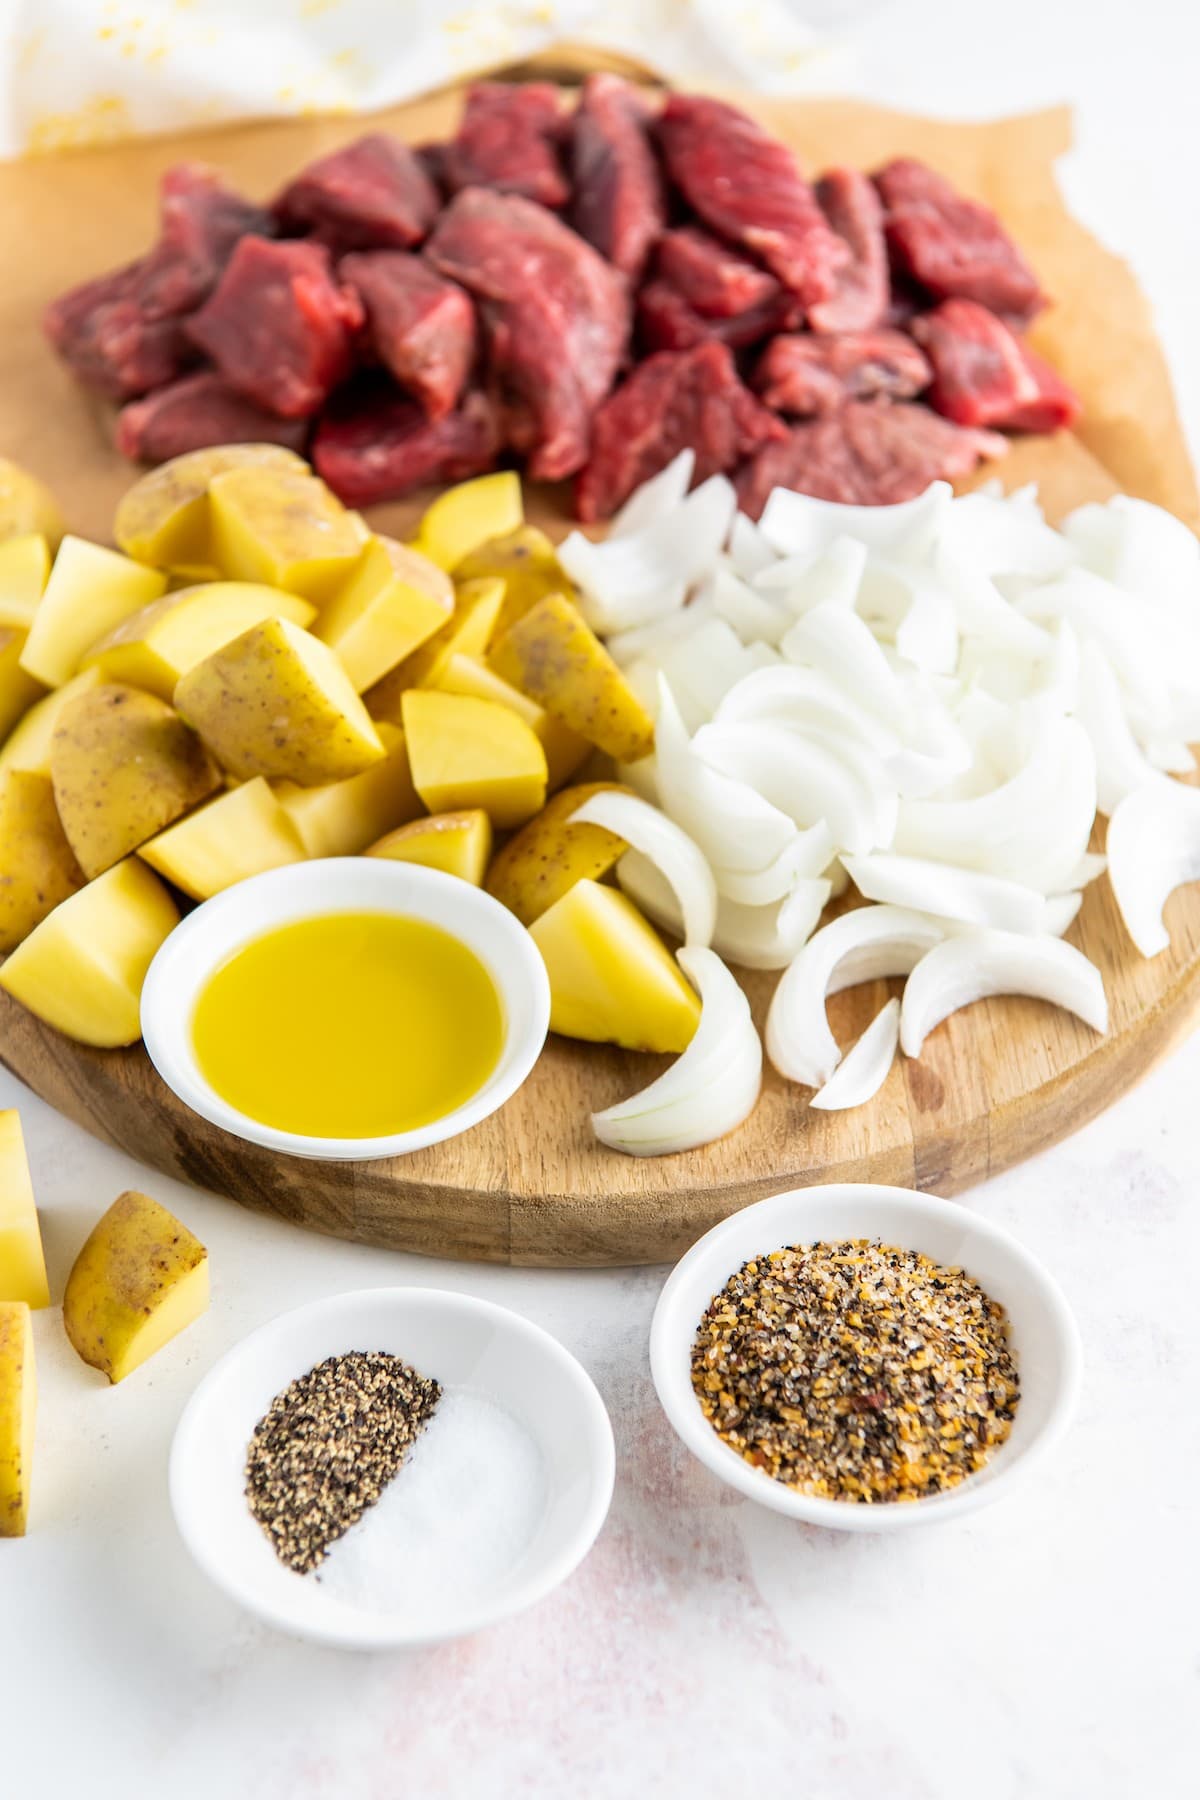 Ingredients for air fryer steak bites with potatoes.